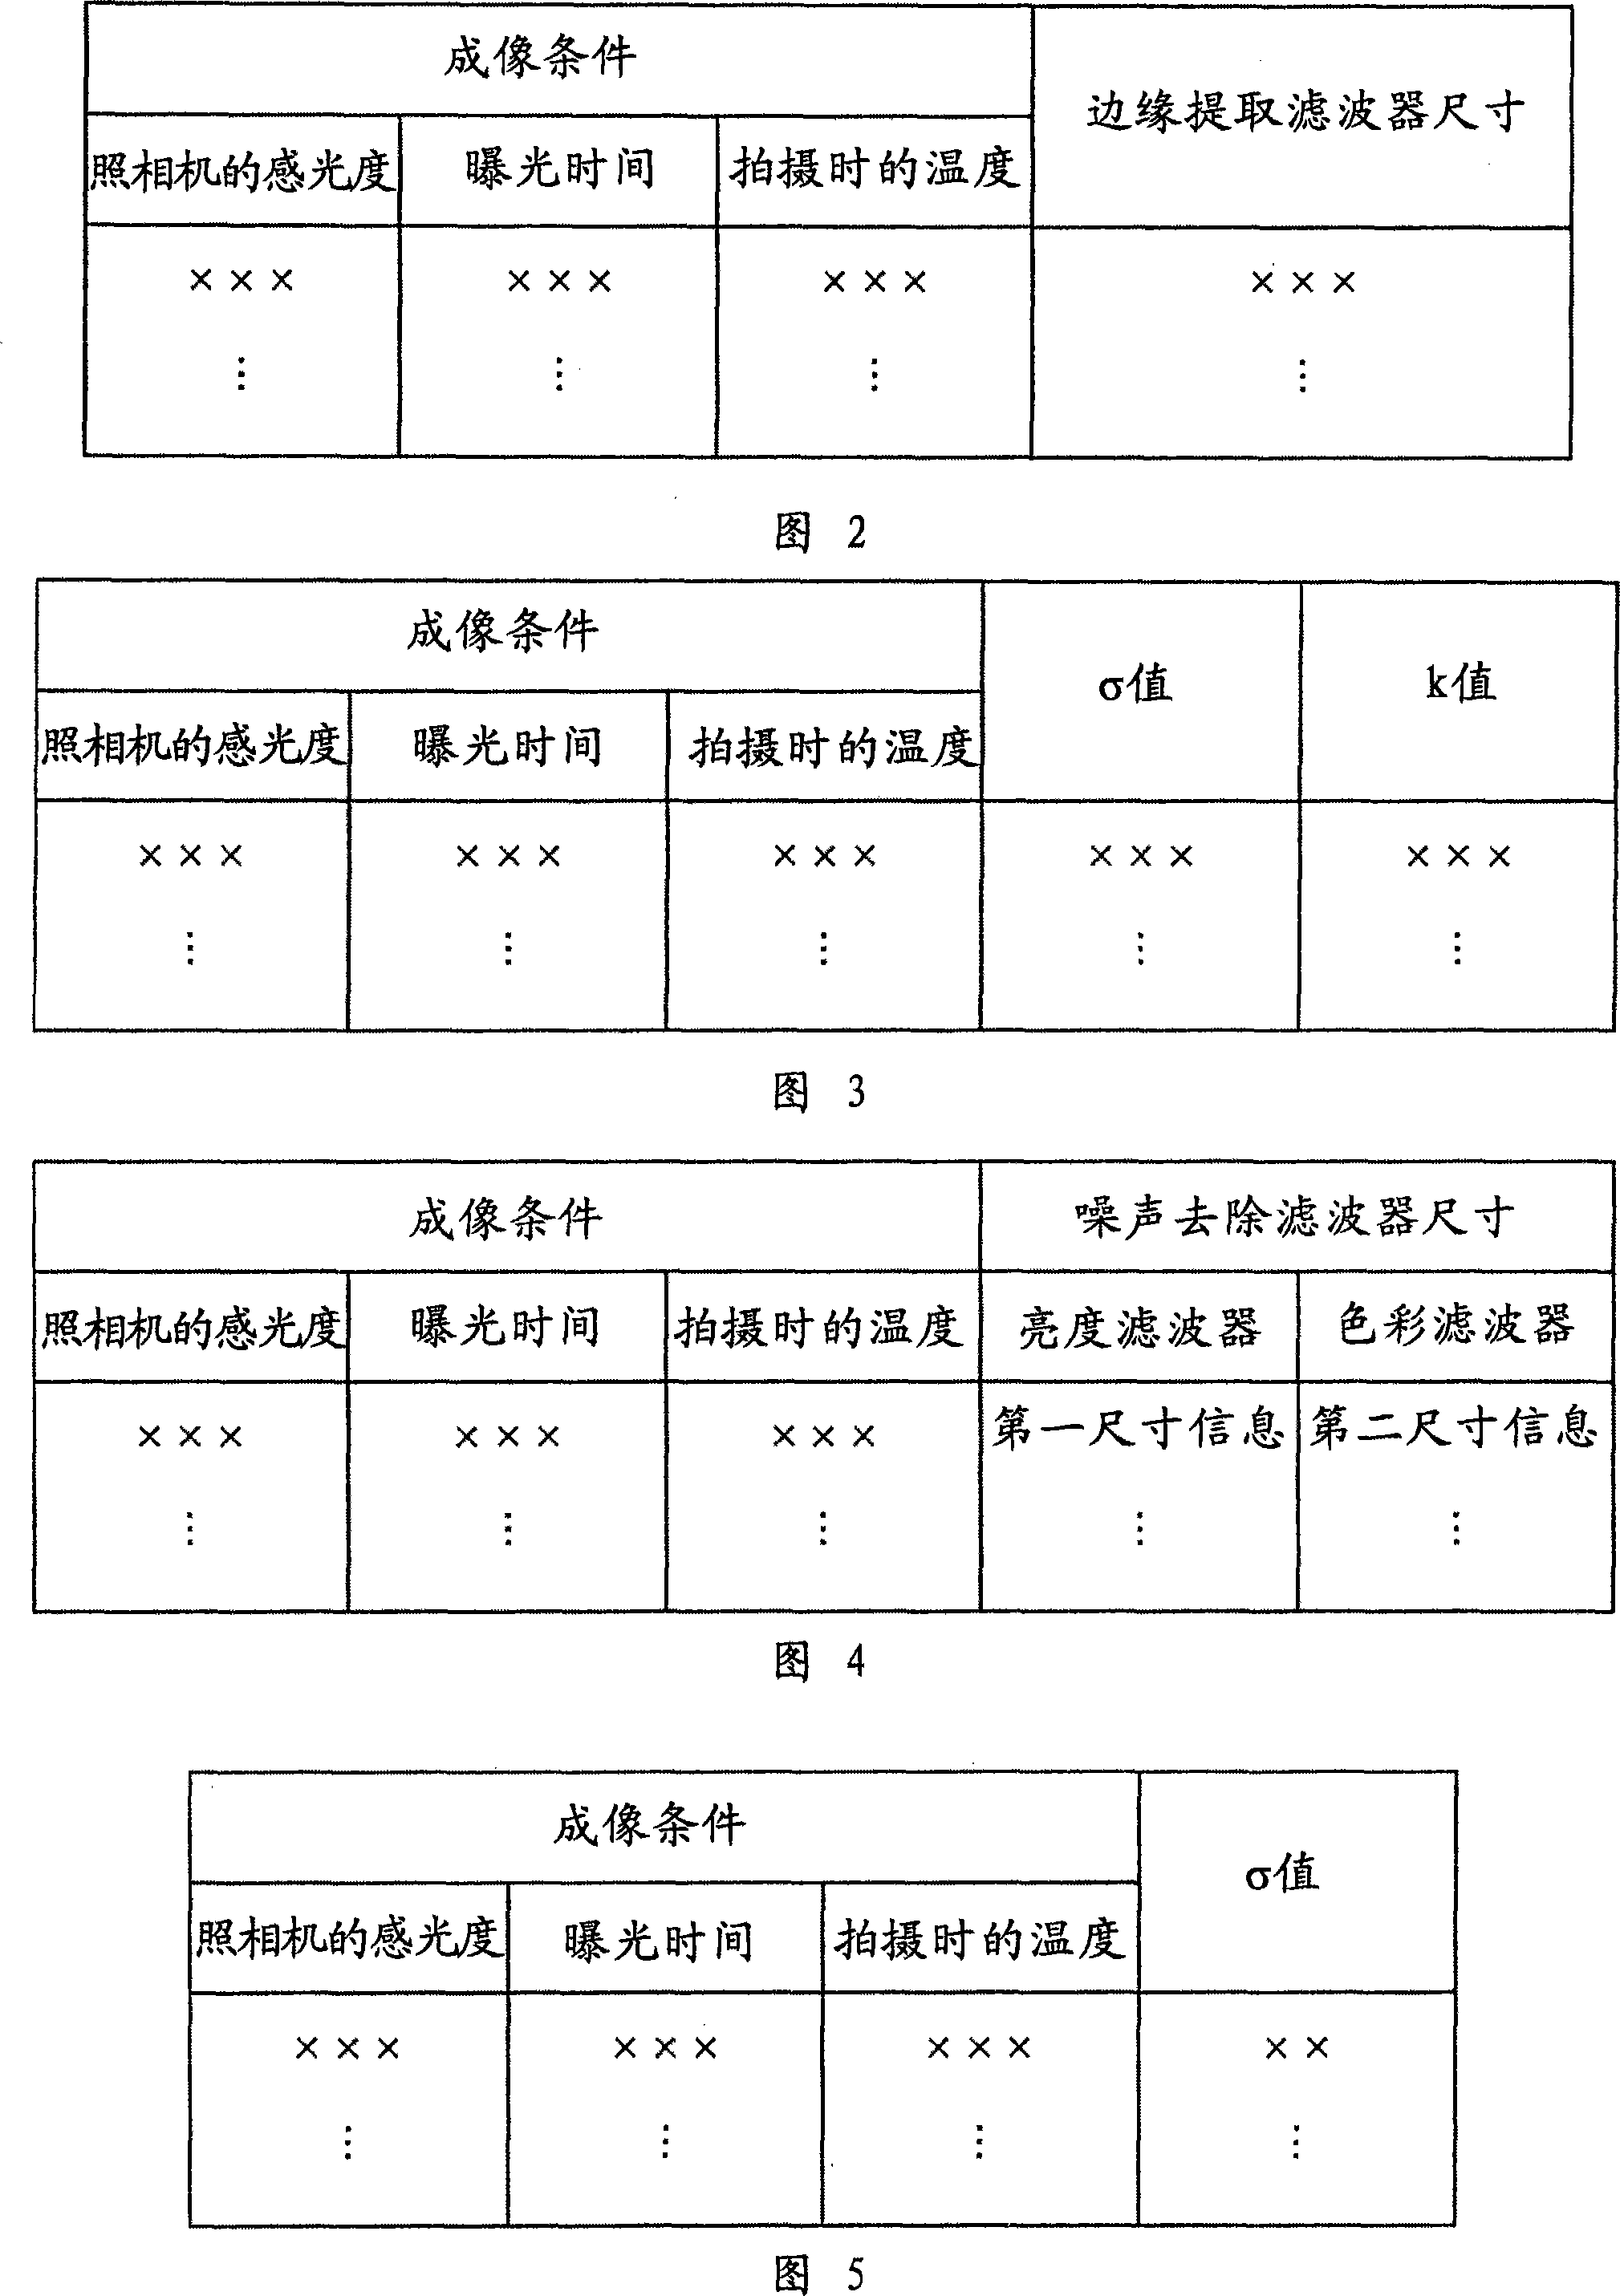 Image processing apparatus, imaging apparatus, image processing method, and computer program product